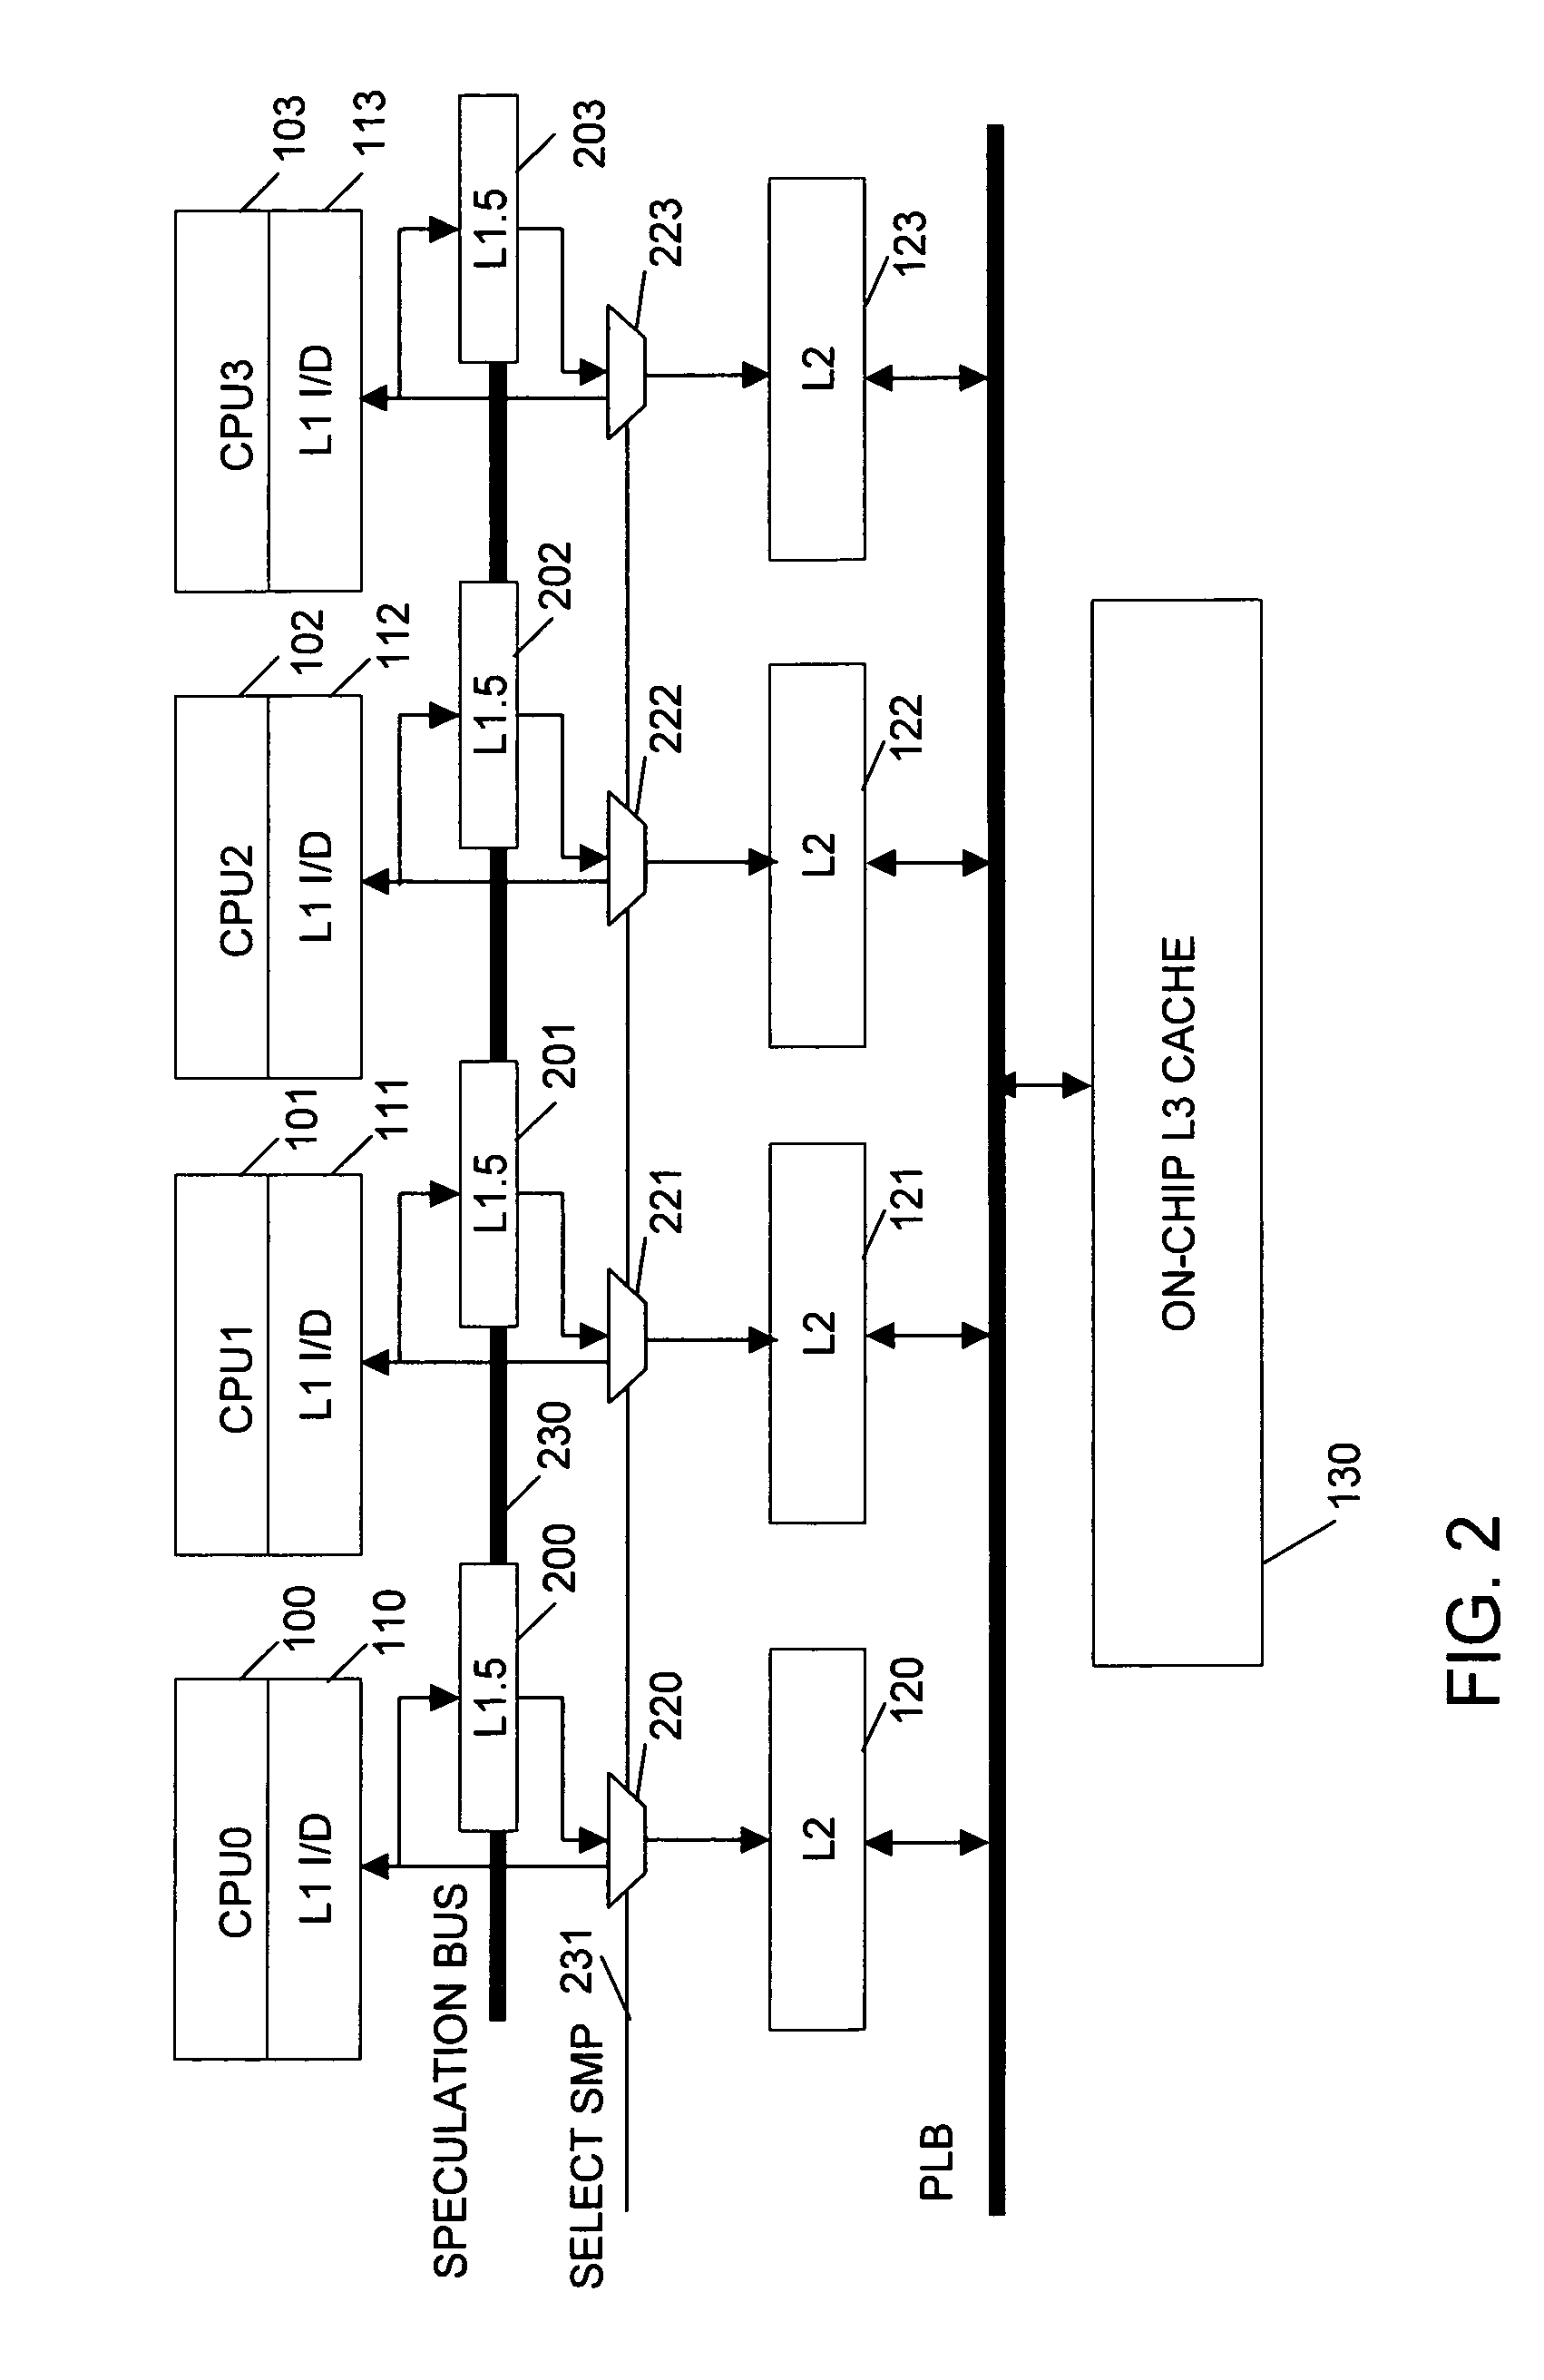 Low complexity speculative multithreading system based on unmodified microprocessor core